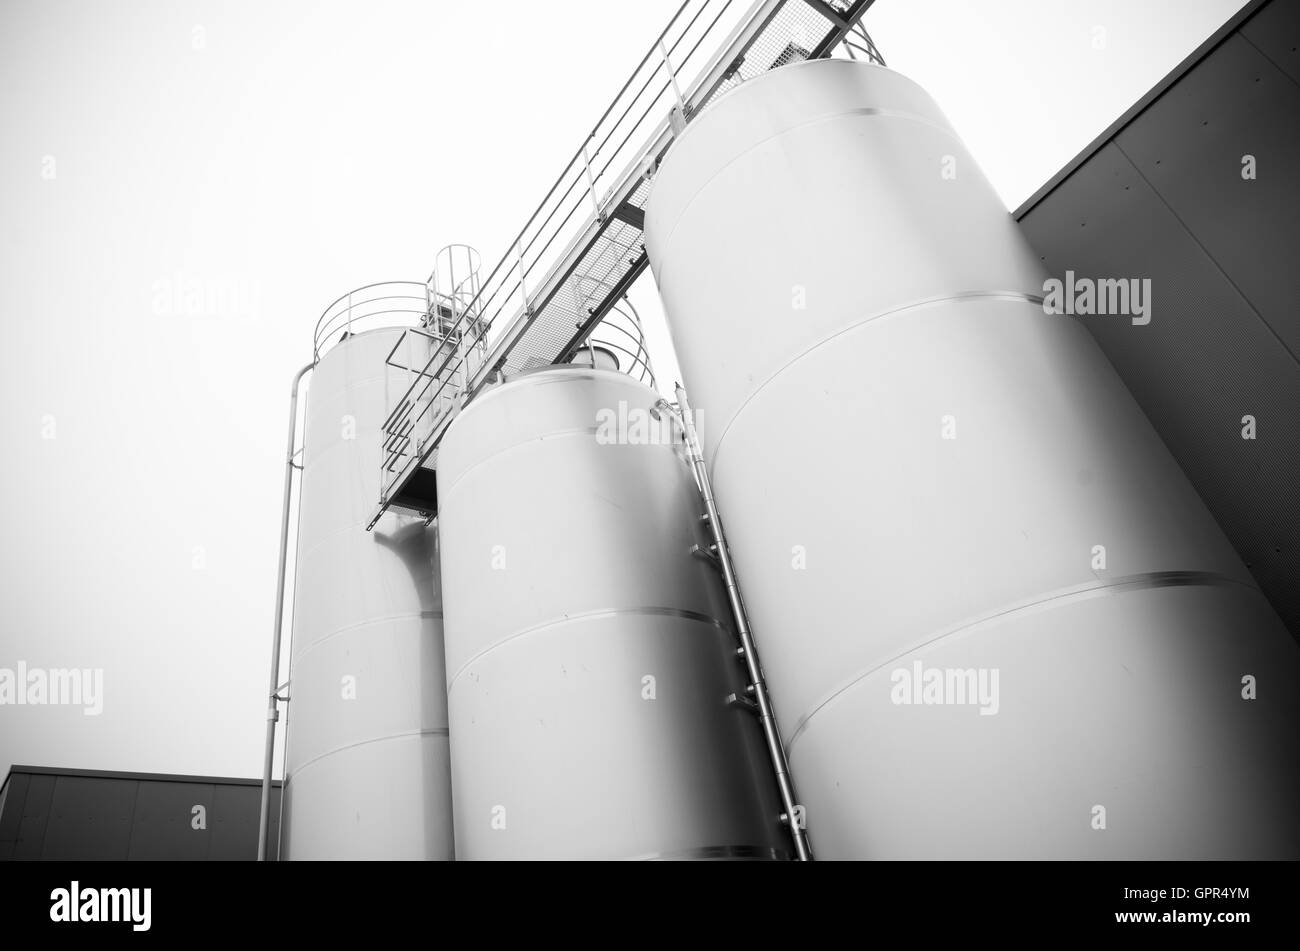 large metal silos for the food processing industry Stock Photo